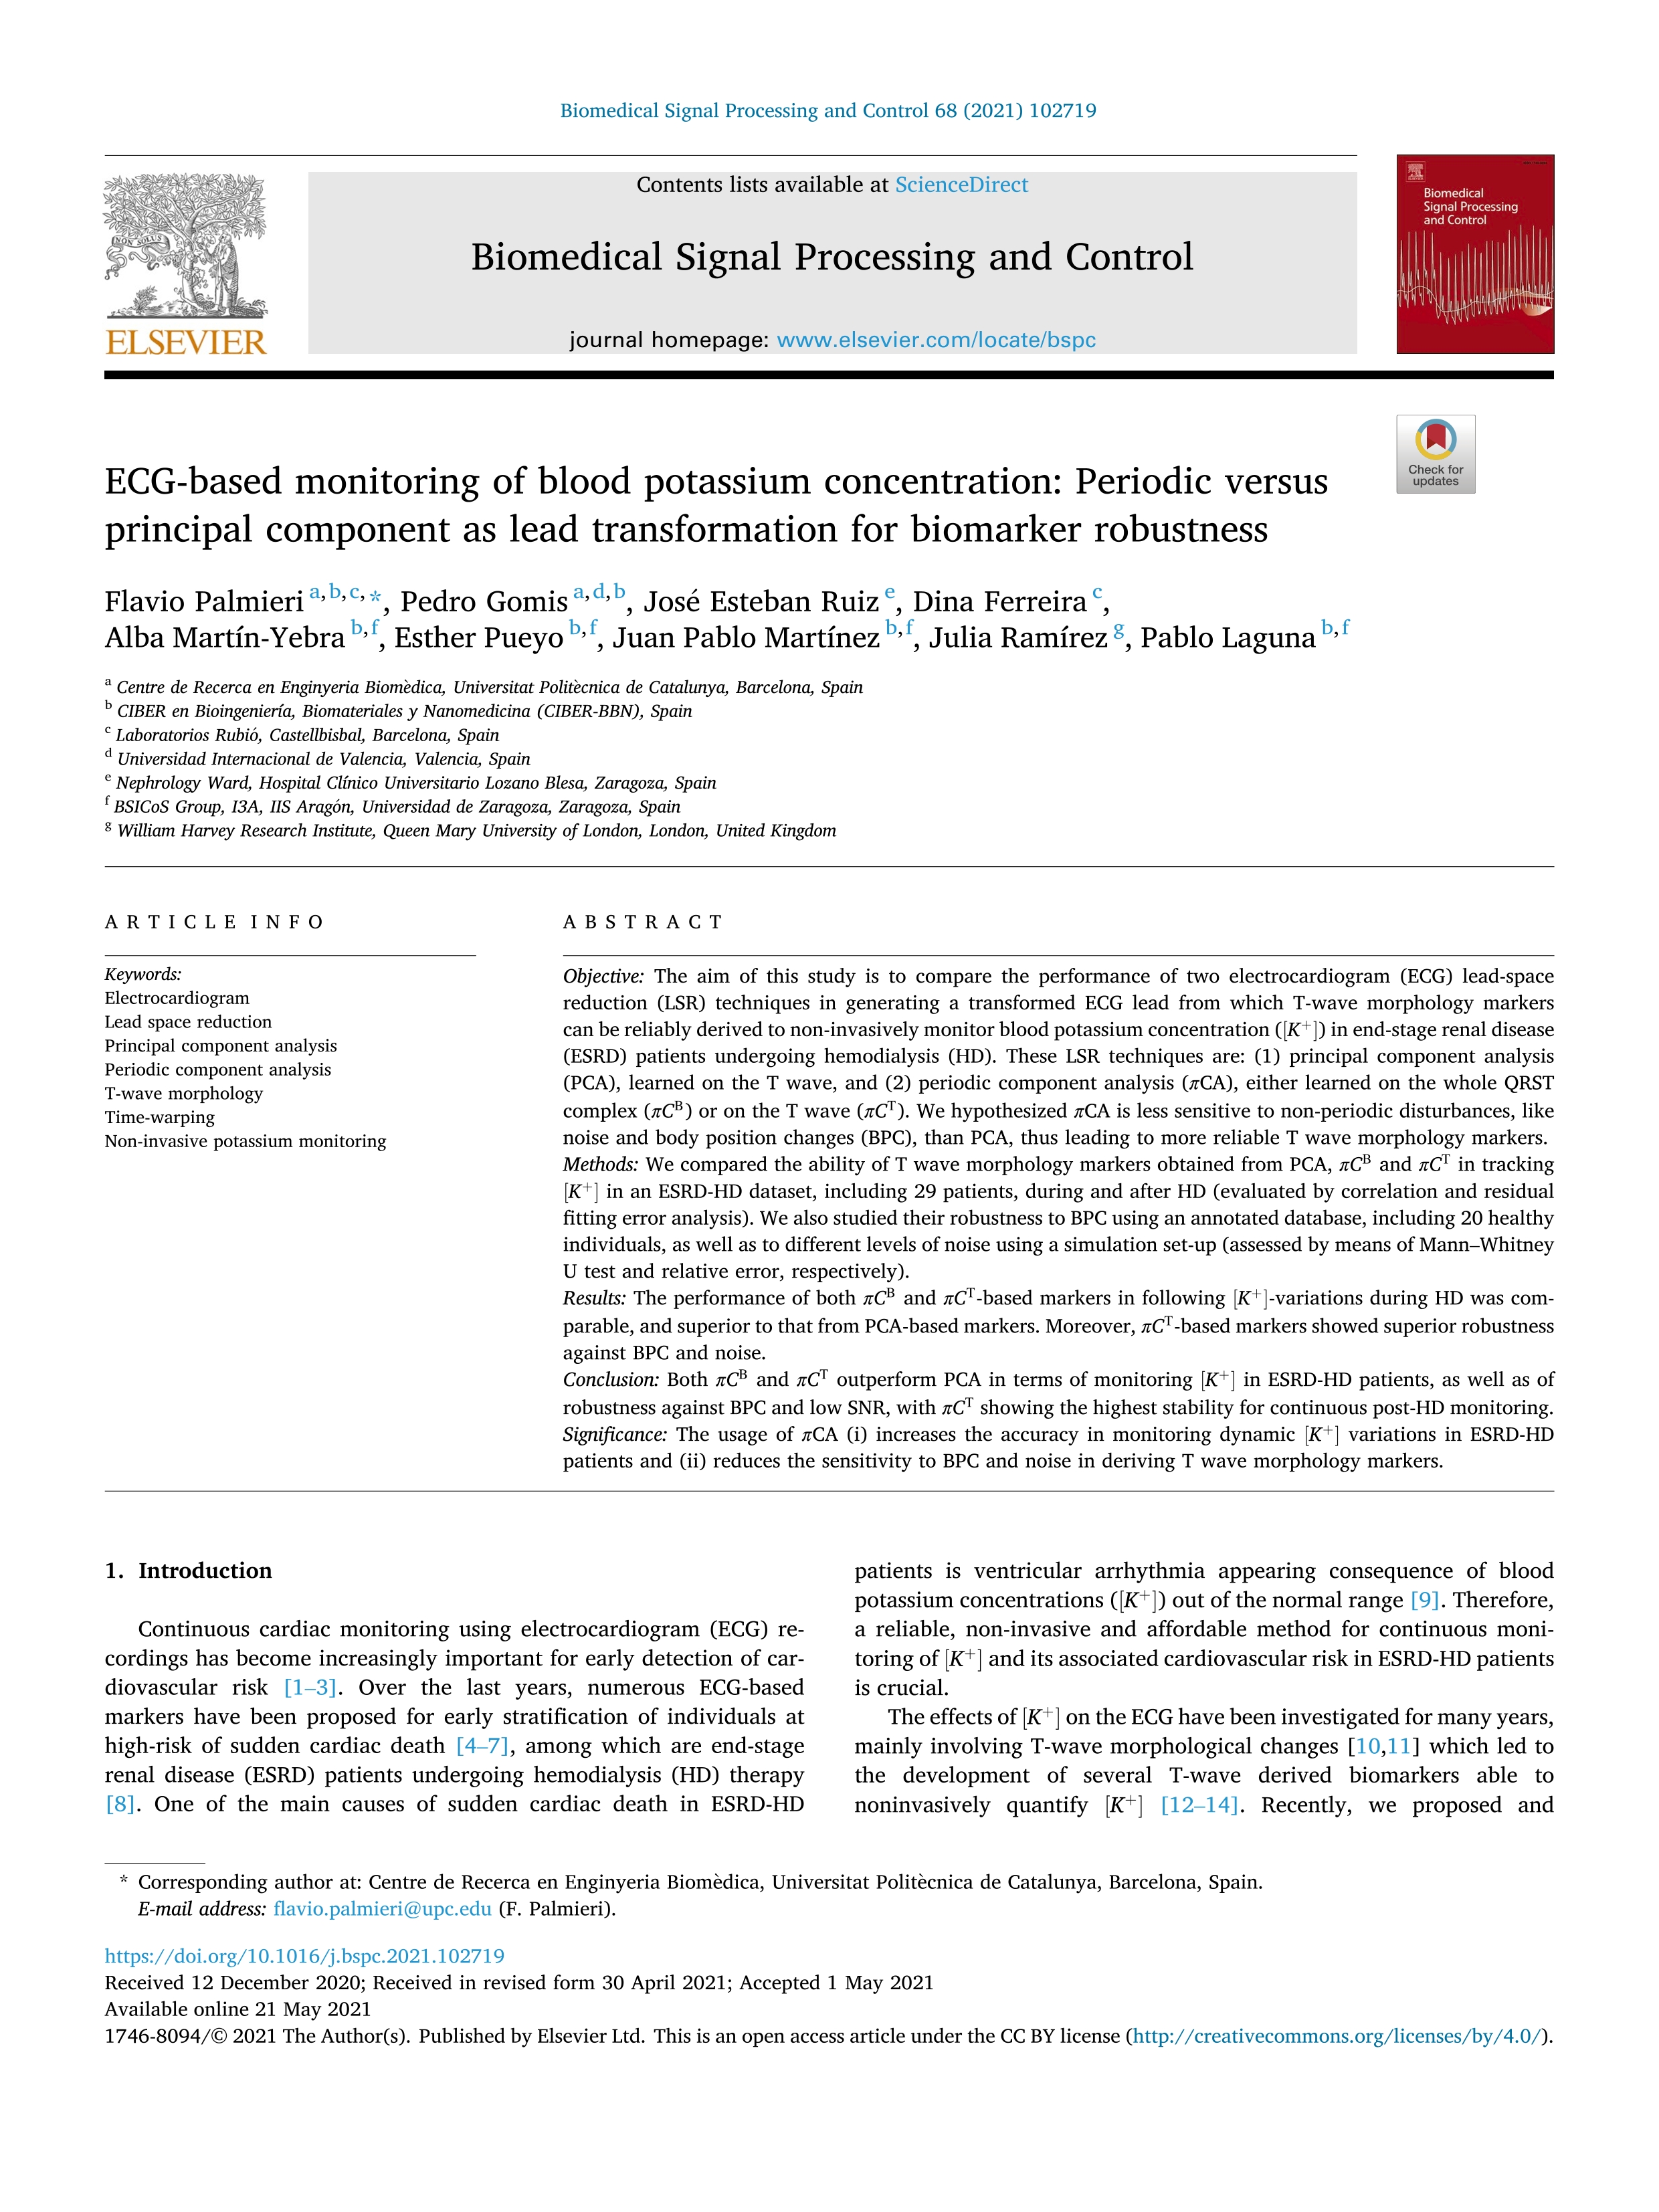 ECG-based monitoring of blood potassium concentration: Periodic versus principal component as lead transformation for biomarker robustness